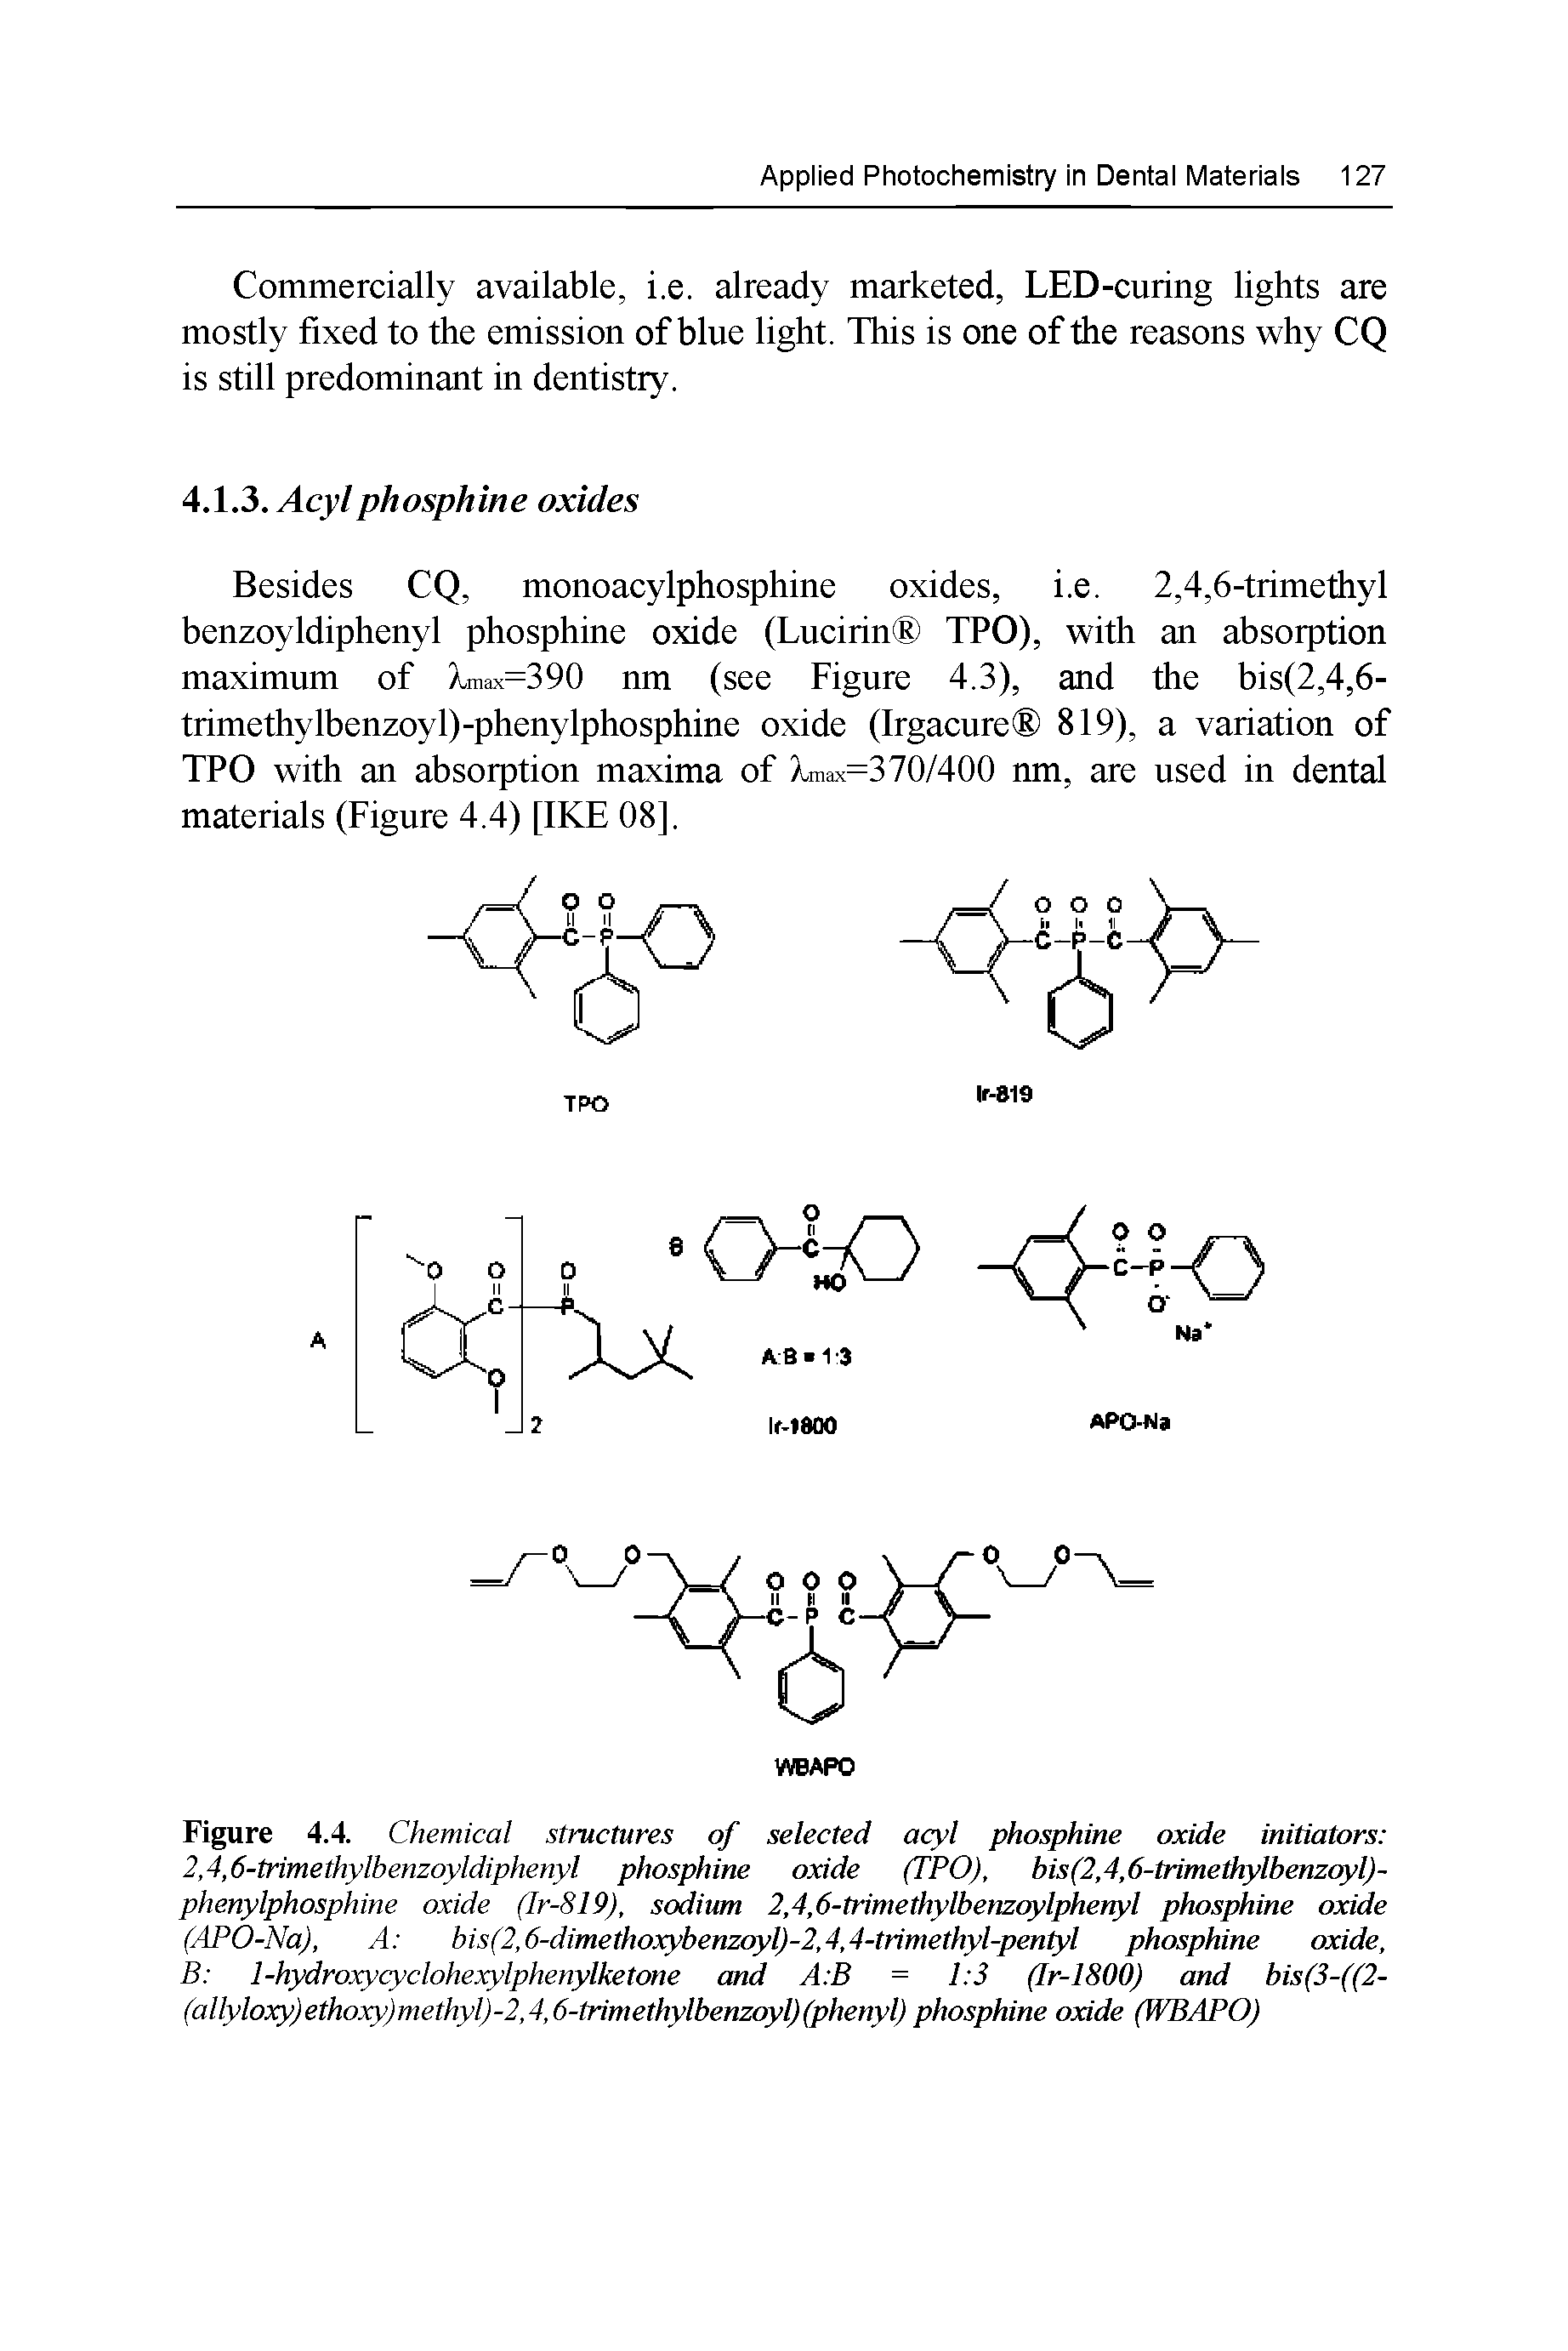 Figure 4.4. Chemical structures of selected acyl phosphine oxide initiators 2,4,6-trimethylbenzoyldiphenyl phosphine oxide (TPO), bis(2,4,6-trimethylbenzoyl)-phenylphosphine oxide (Ir-819), sodium 2,4,6-trimethylbenzcylphenyl phosphine oxide (APO-Na), A bis(2,6-dimethoxybenzoyl)-2,4,4-trimethyl-pentyl phosphine oxide, B 1-hydroxycyclohexylphenylketone and A B = 1 3 (Ir-1800) and bis(3-((2-...